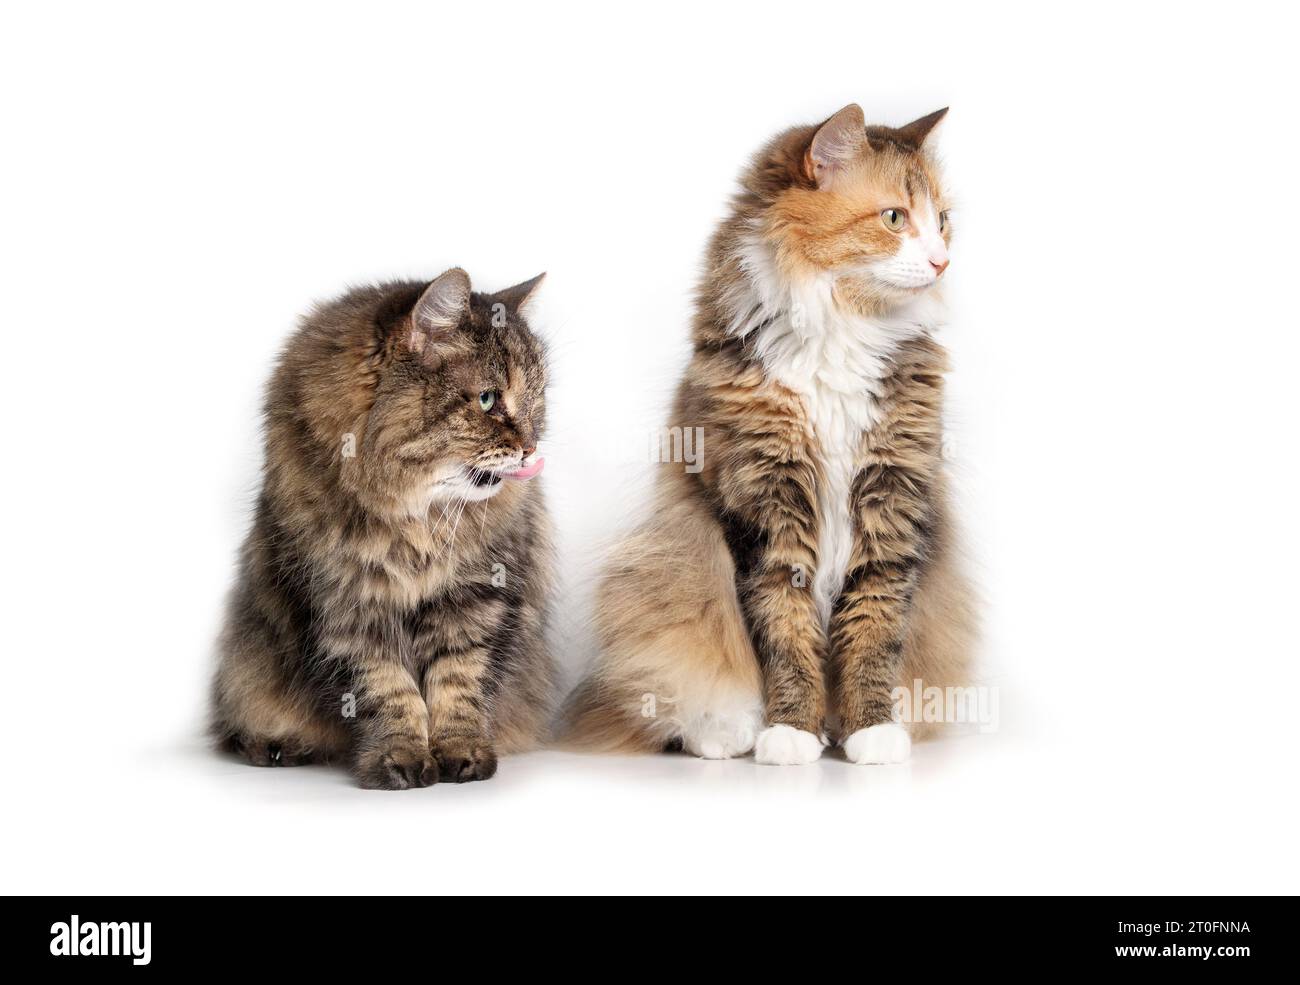 Curious cats looking at something of screen while sitting. Two bonded fluffy cats sitting together in companionship. 17 years old senior tabby cat and Stock Photo